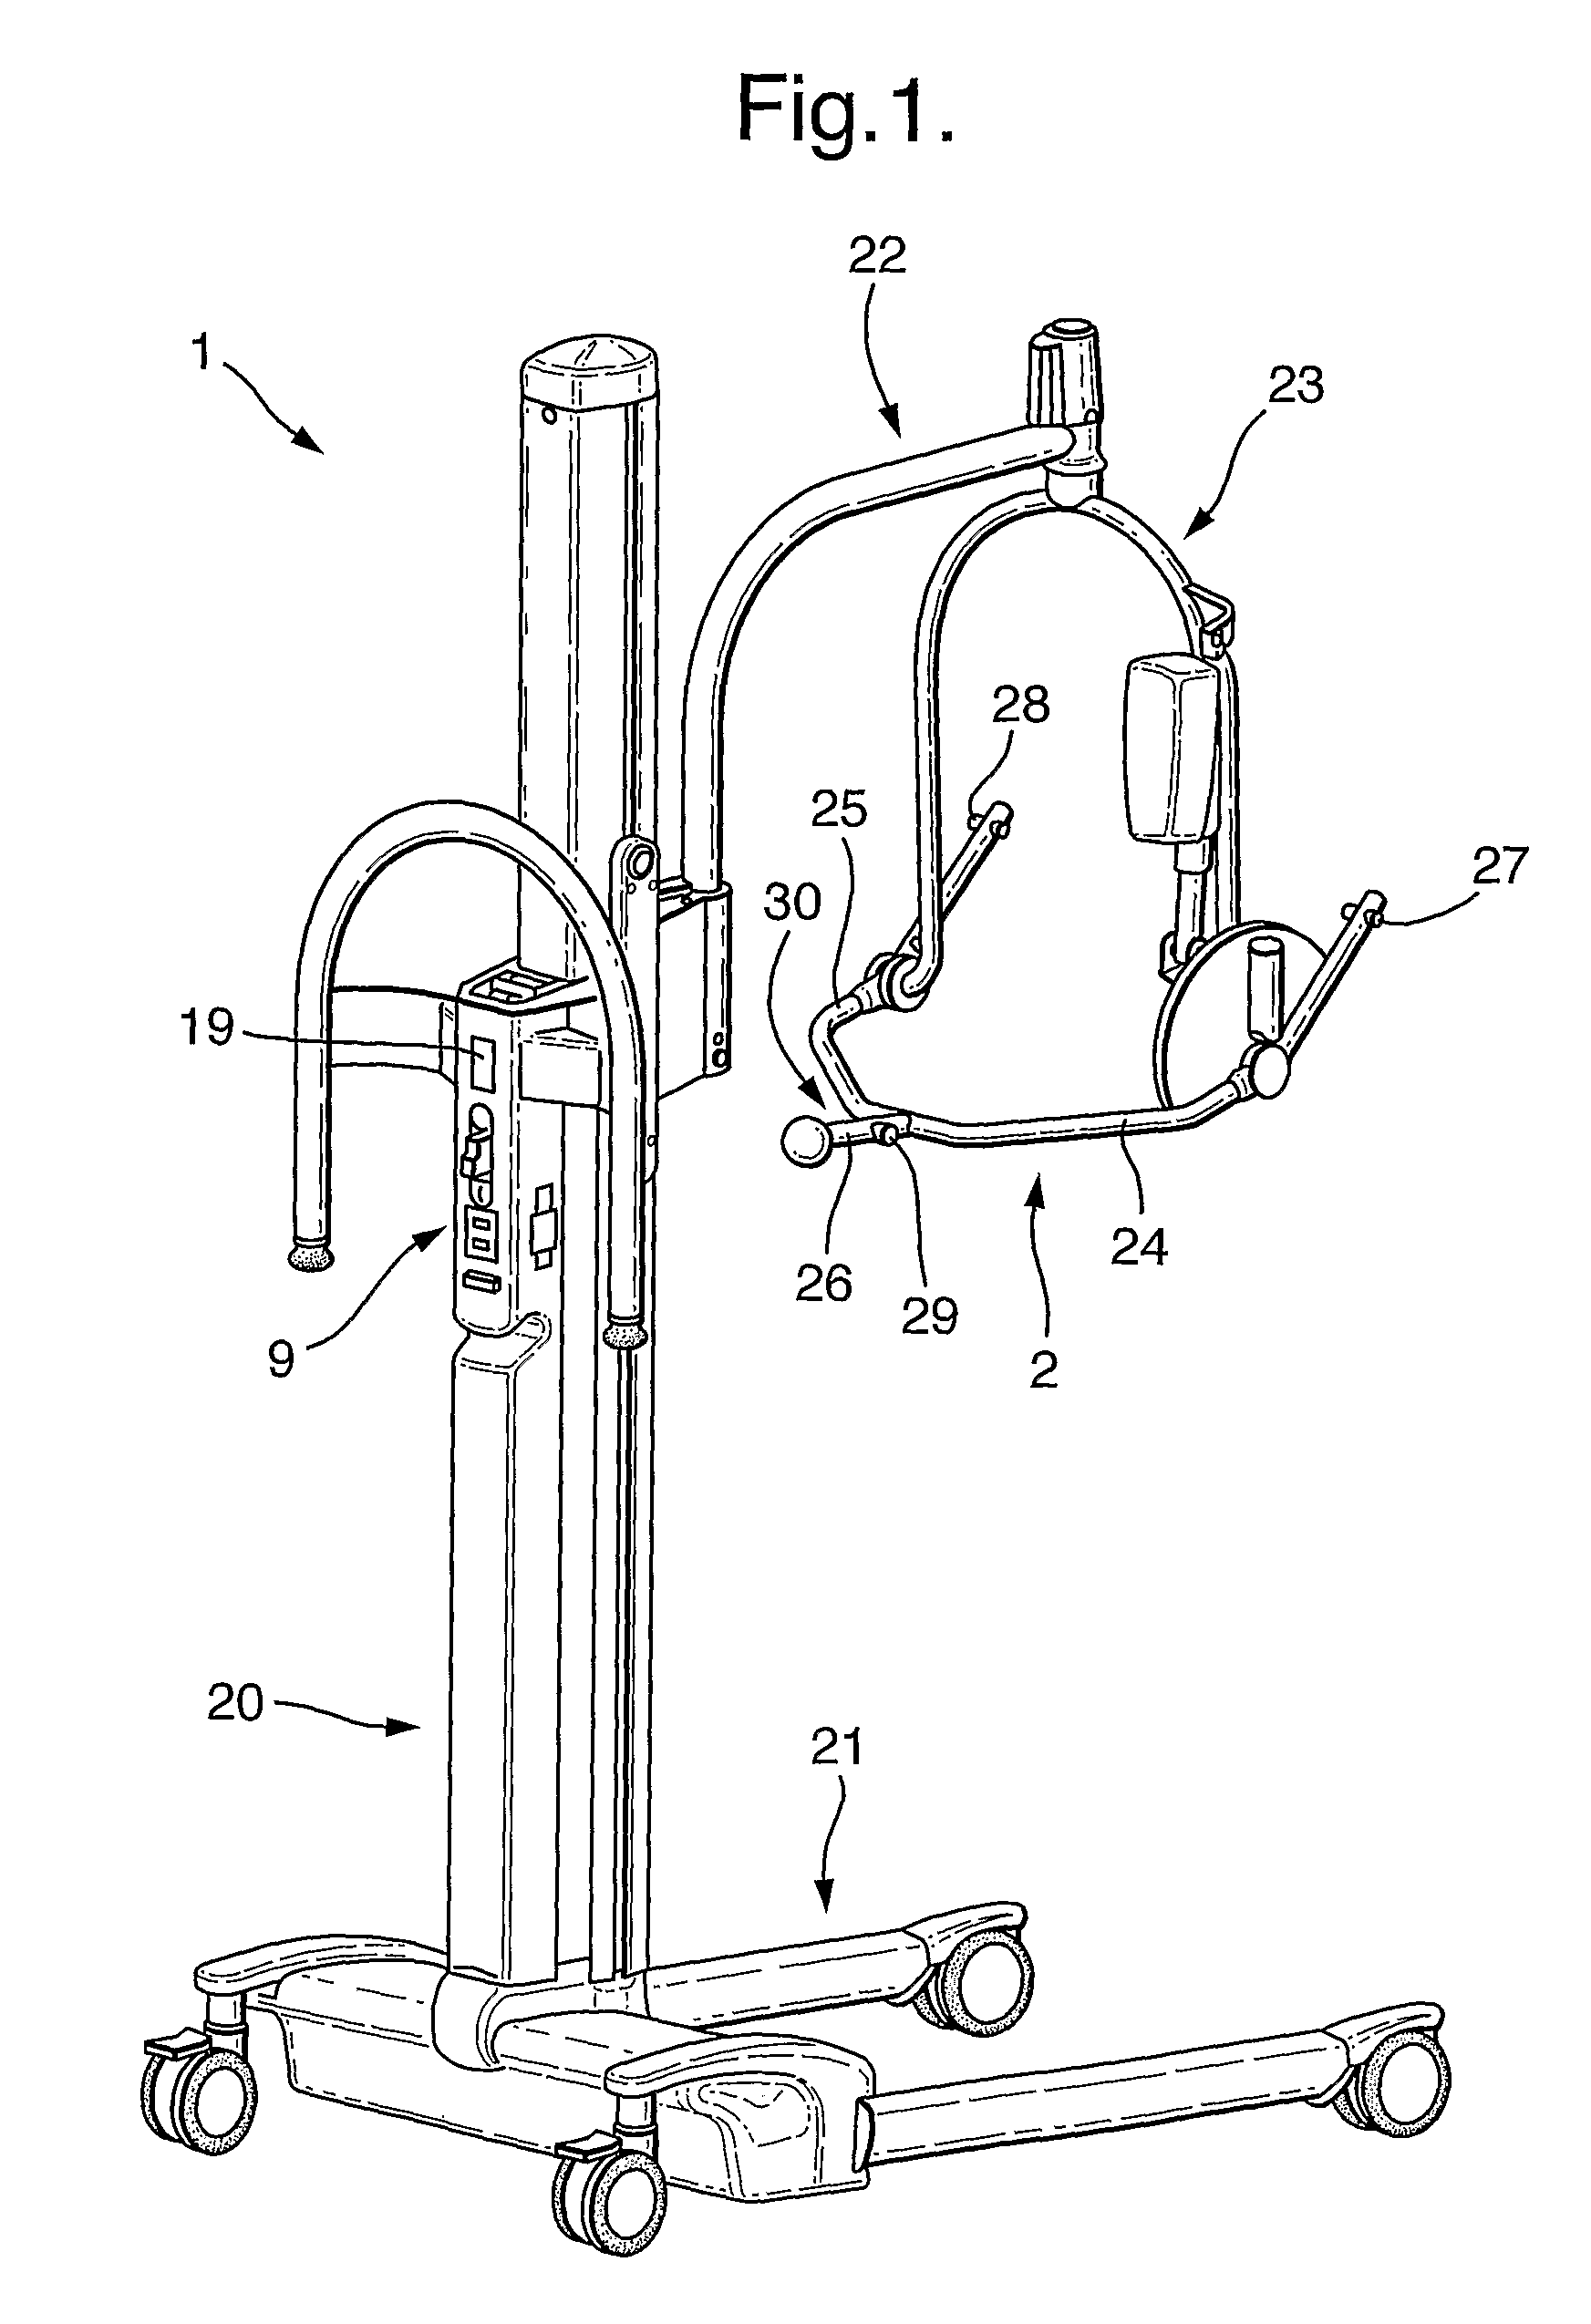 Hoist device with sling attachment detection